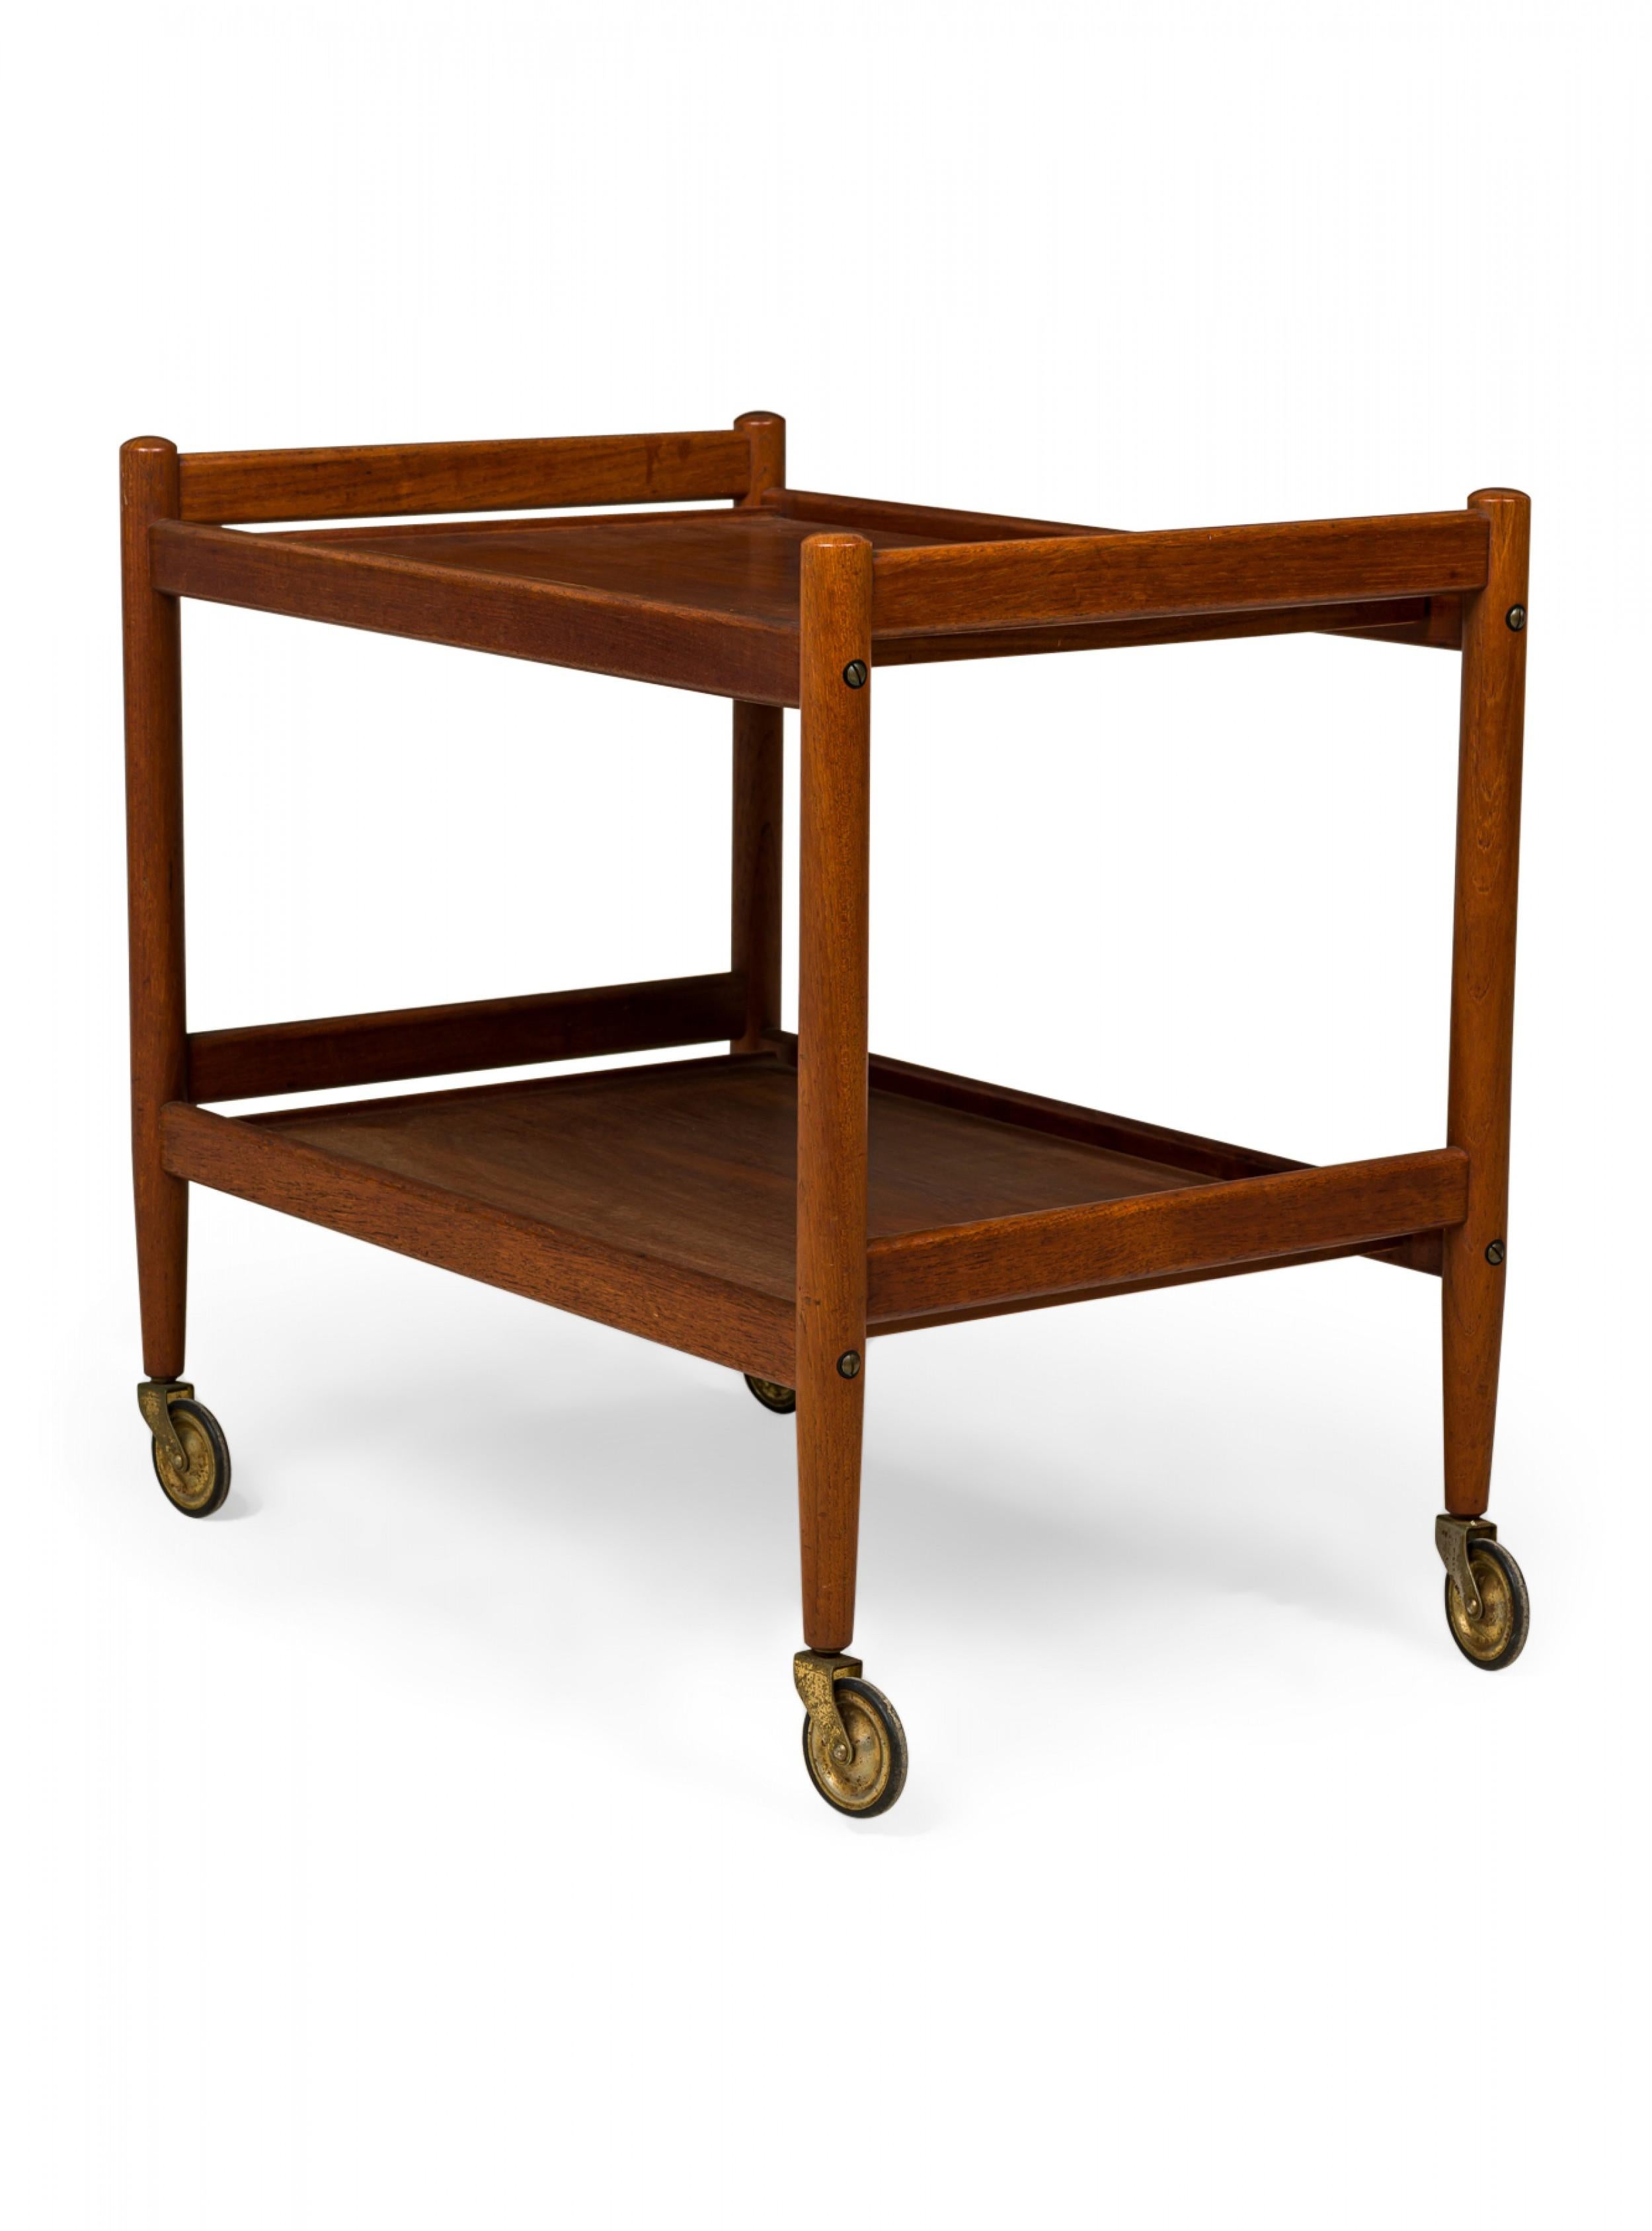 Grete Jalk Danish Teak Serving Trolley In Good Condition For Sale In New York, NY